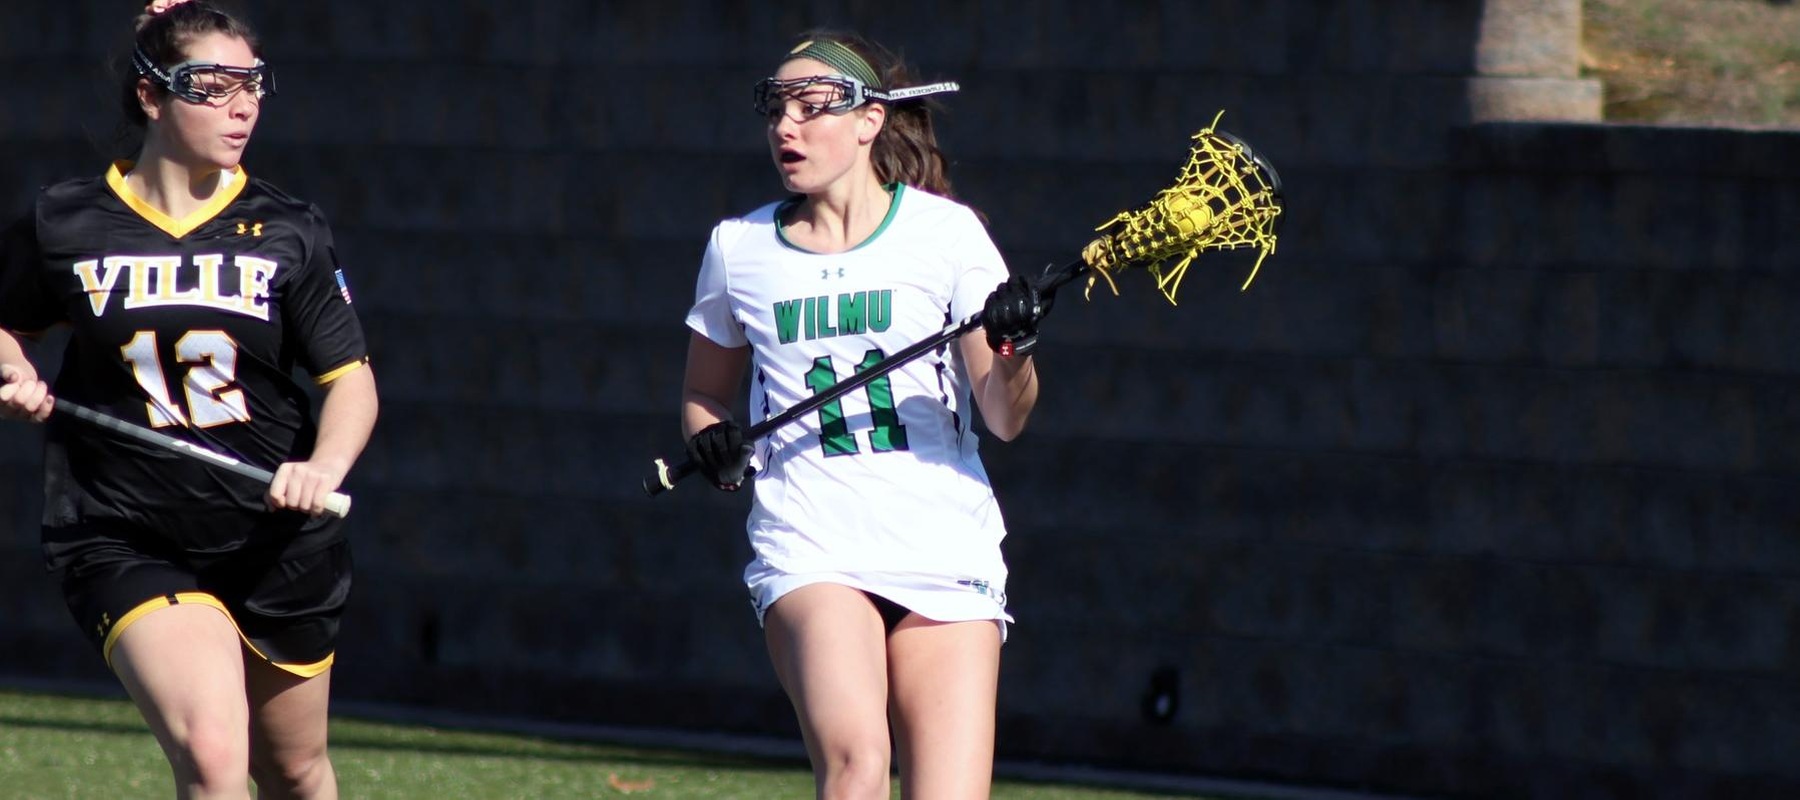 Copyright 2020. Wilmington University. All rights reserved. Photo by Laura Gil. February 22, 2020 vs. Millersville.